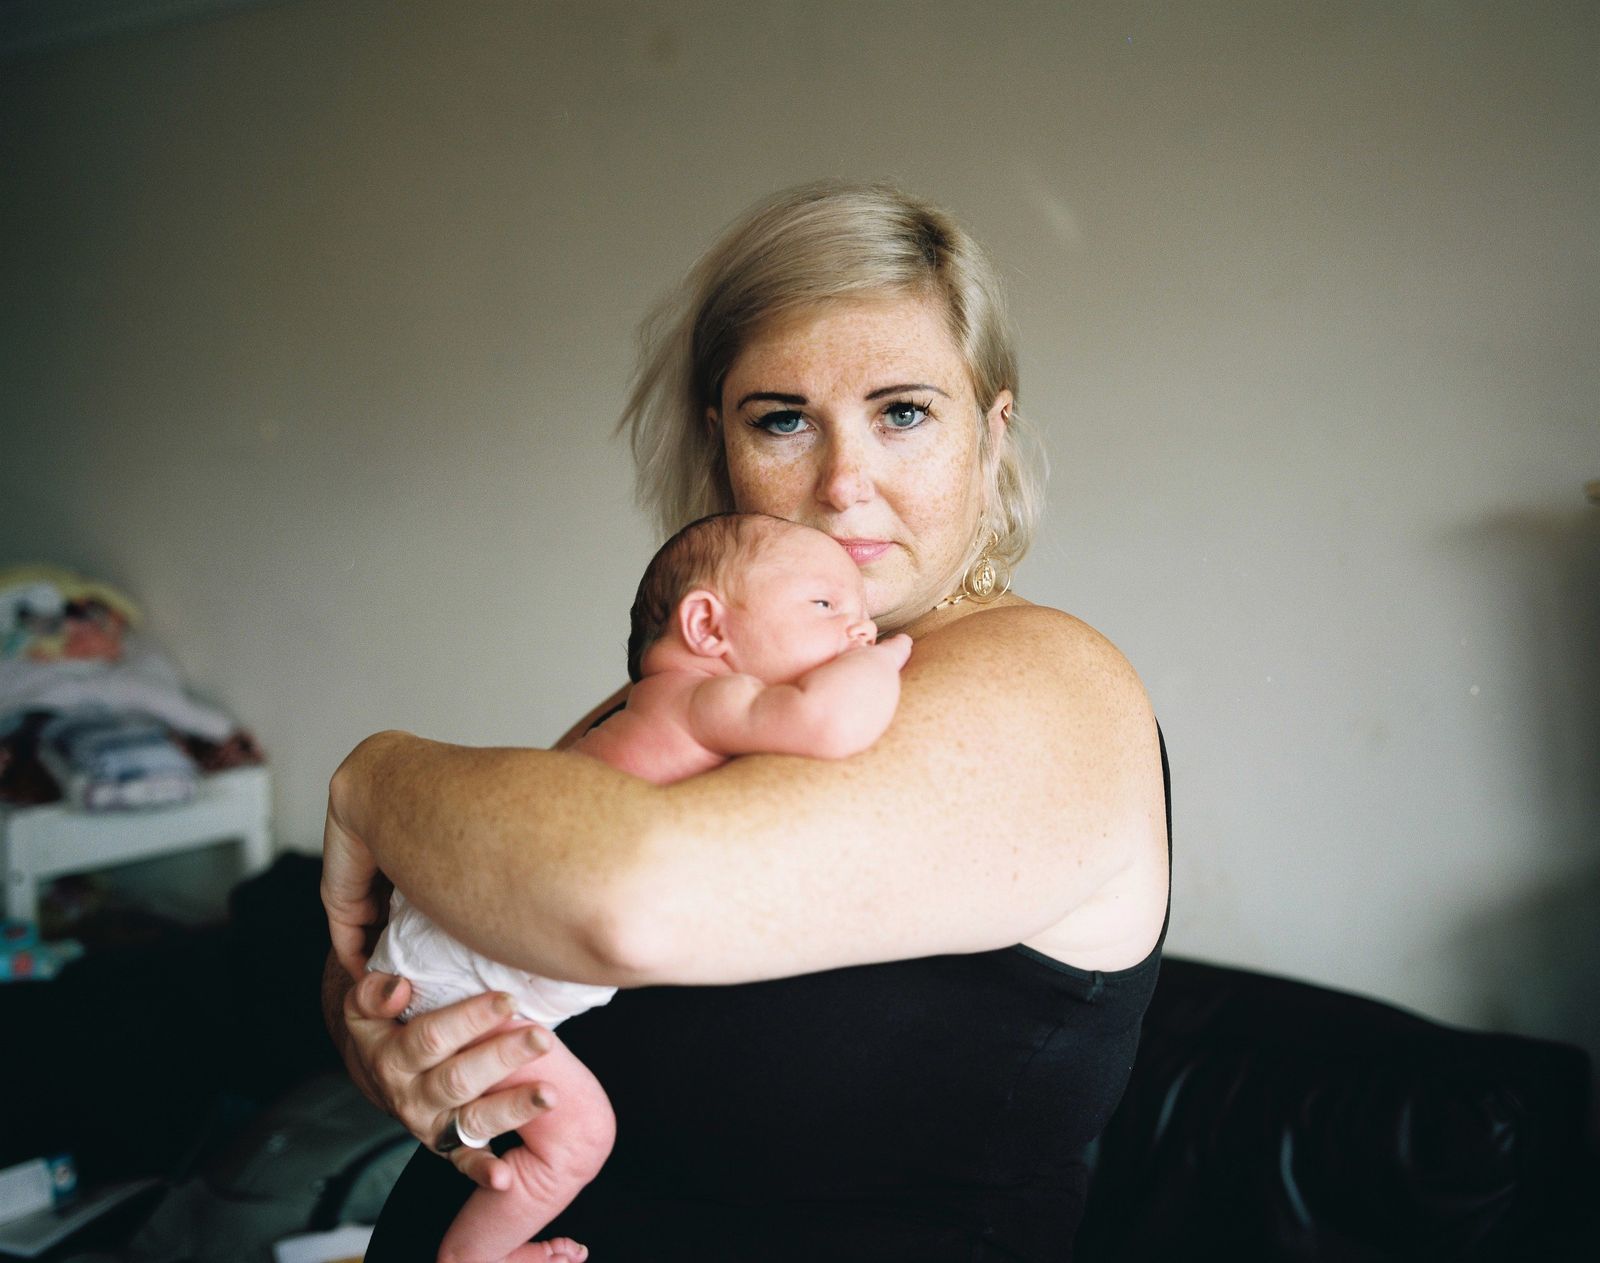 © Kirsty Mackay - Debbie with her new born baby, Anderston.